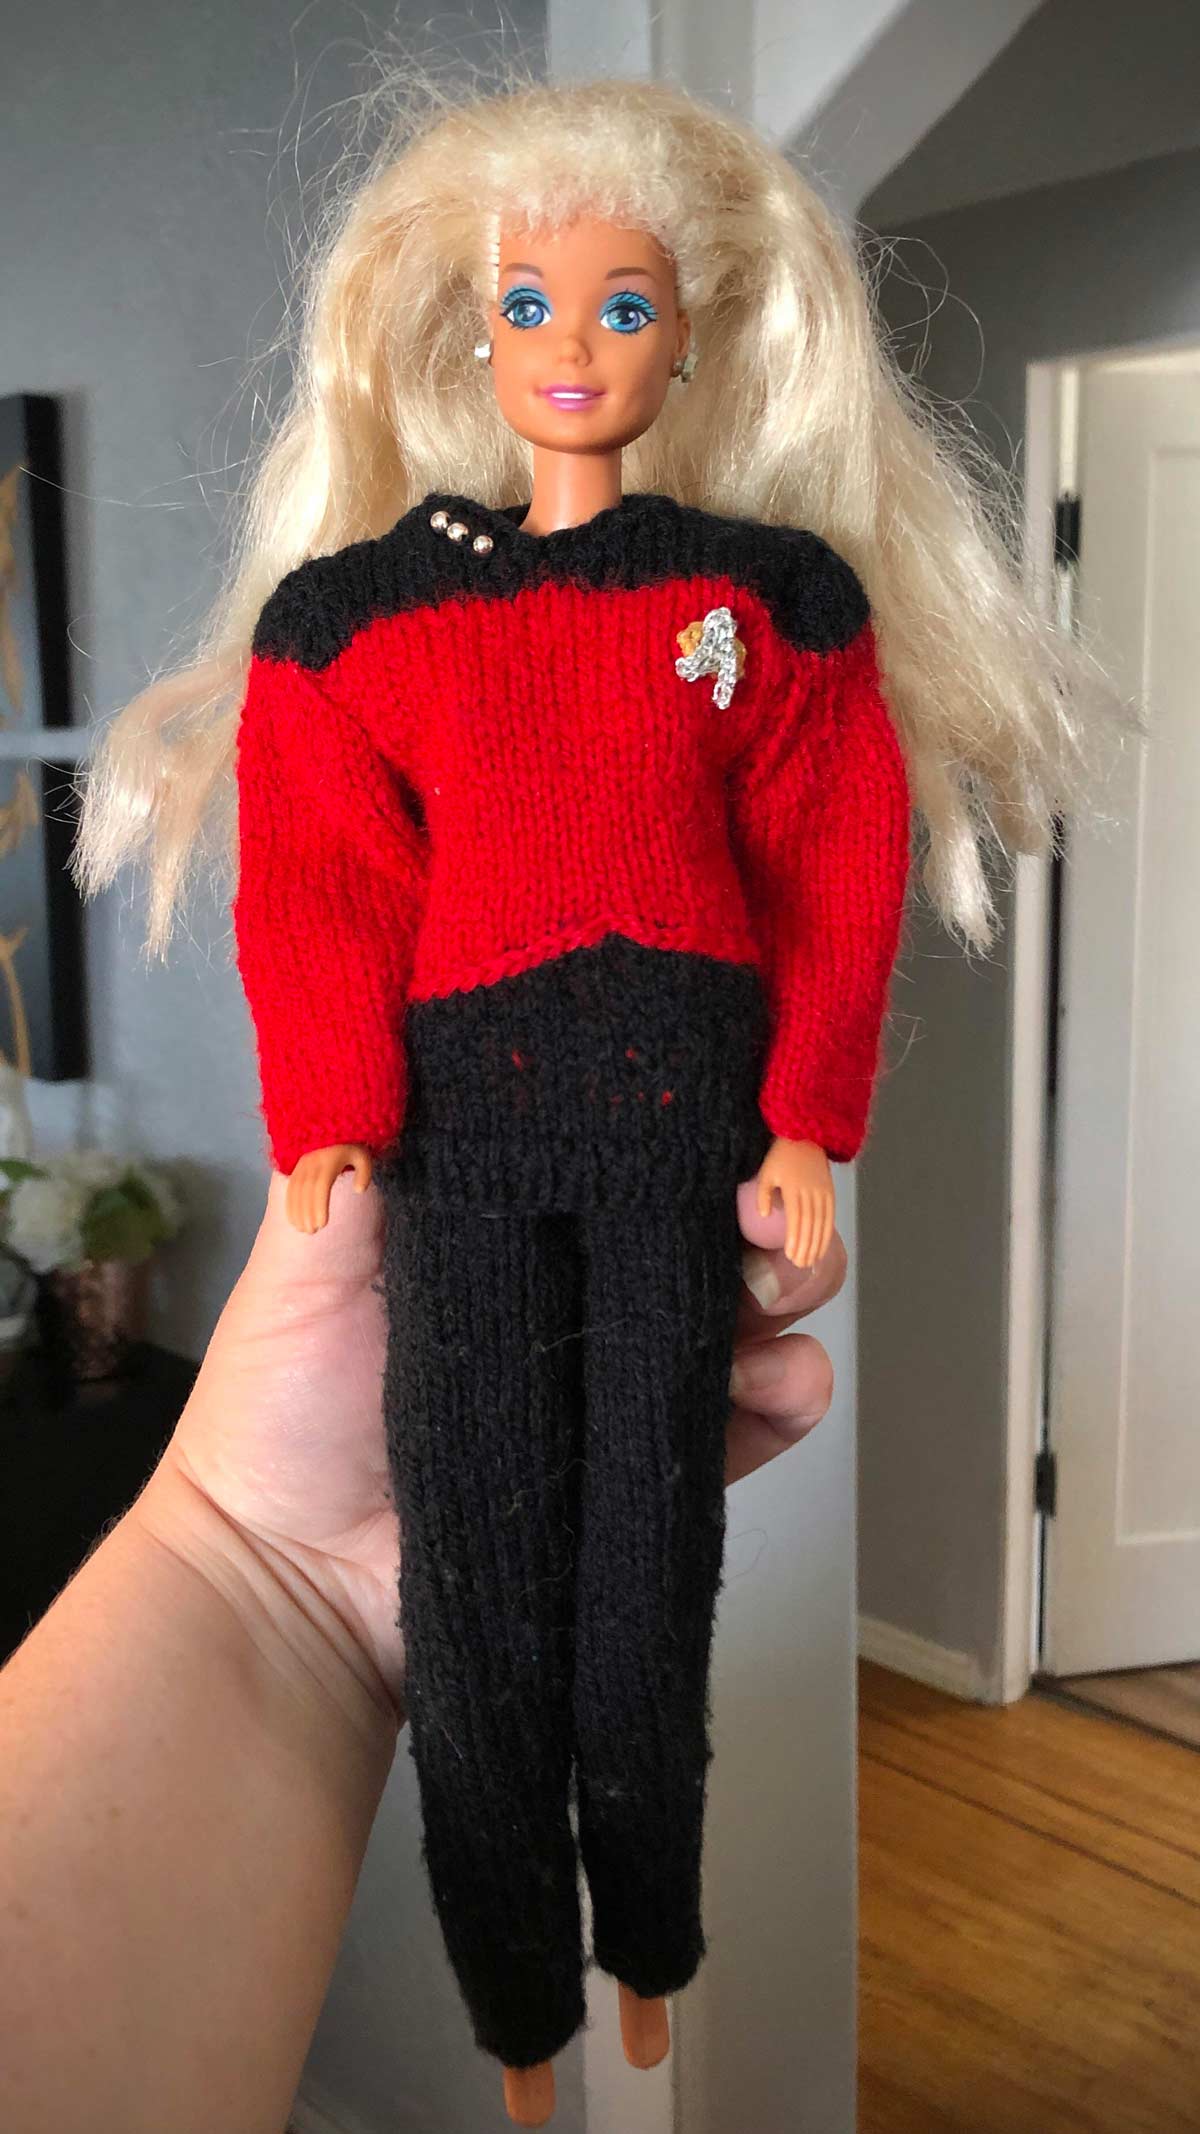 My grandma was a huge Star Trek fan. She also used to make all my Barbie clothes